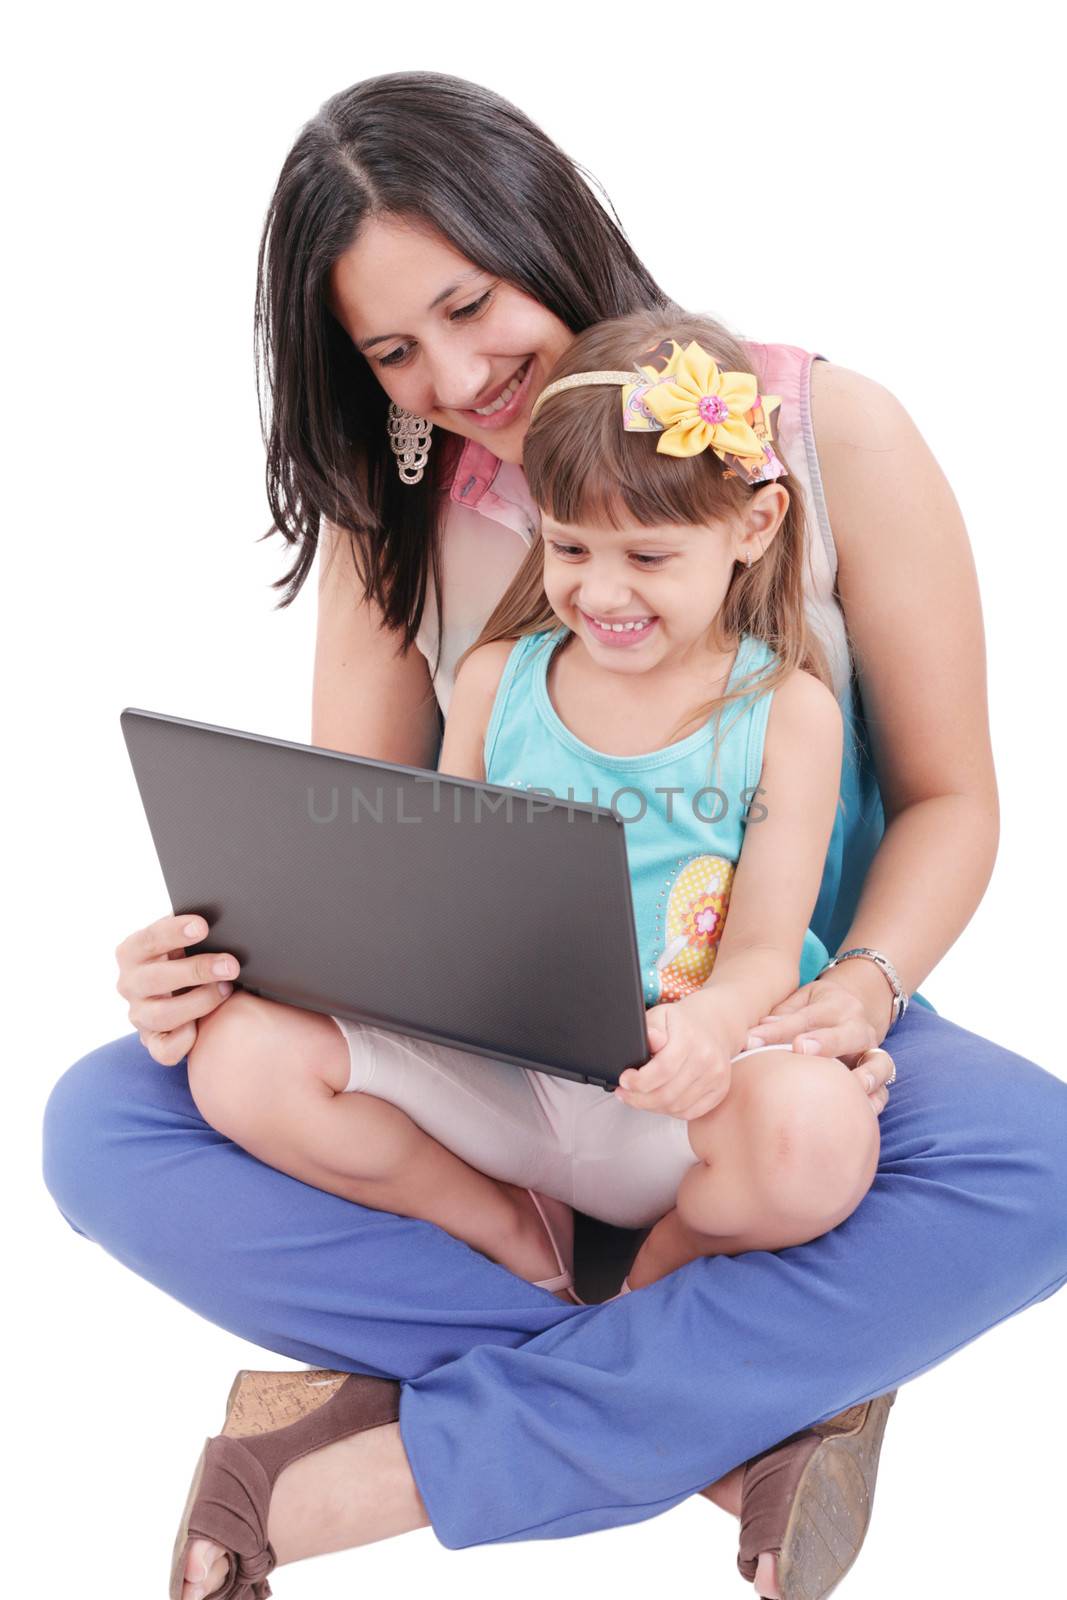 Young mother and daughter looking at laptop. Focus in the mother.